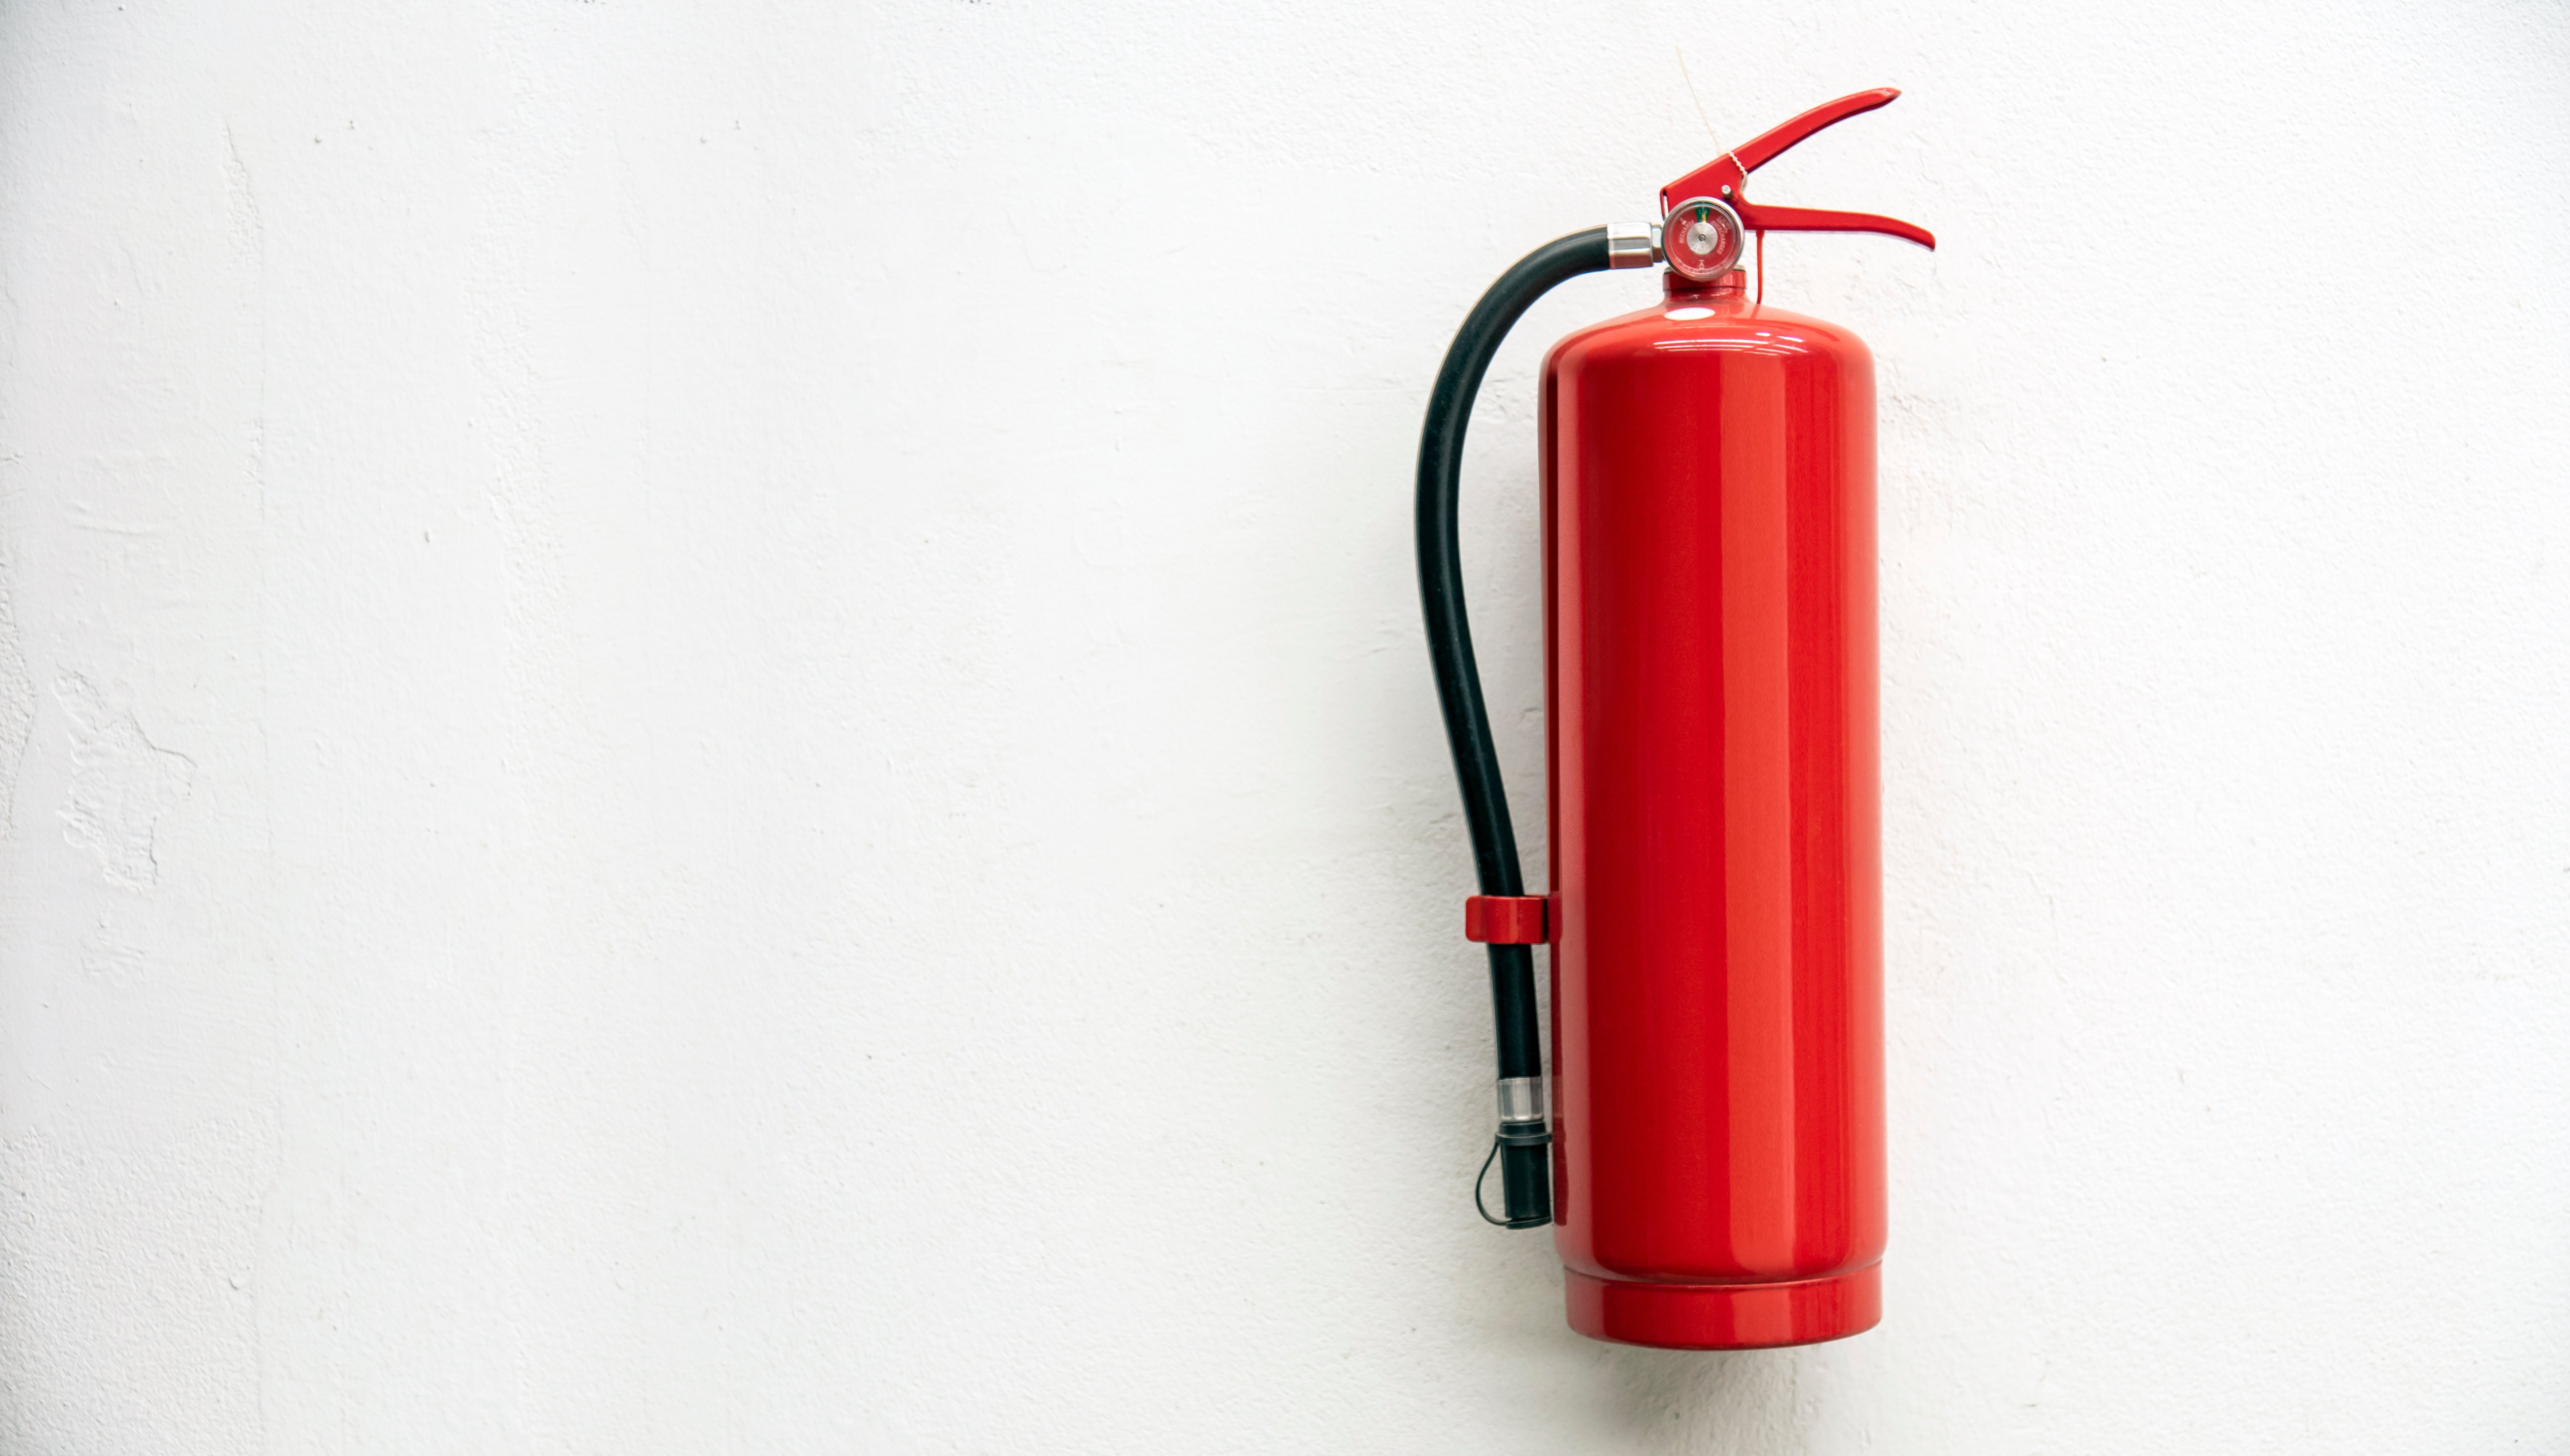 fire-extinguisher-on-white-concrete-wall-for-safet-FU87JS3